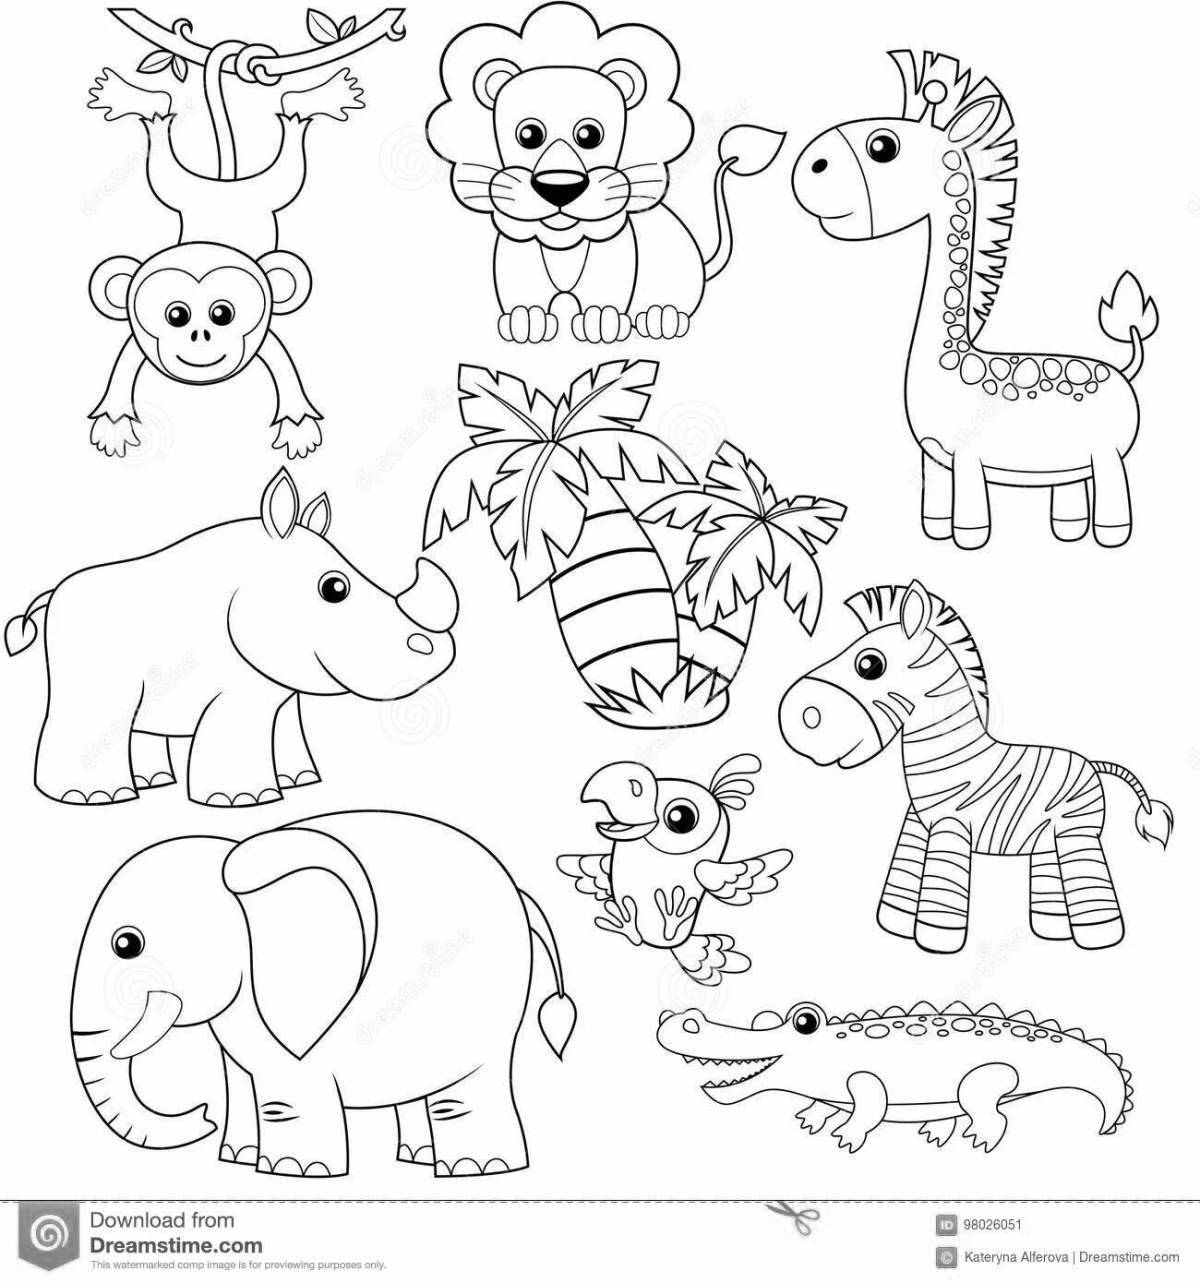 Cute African animals coloring book for 3-4 year olds